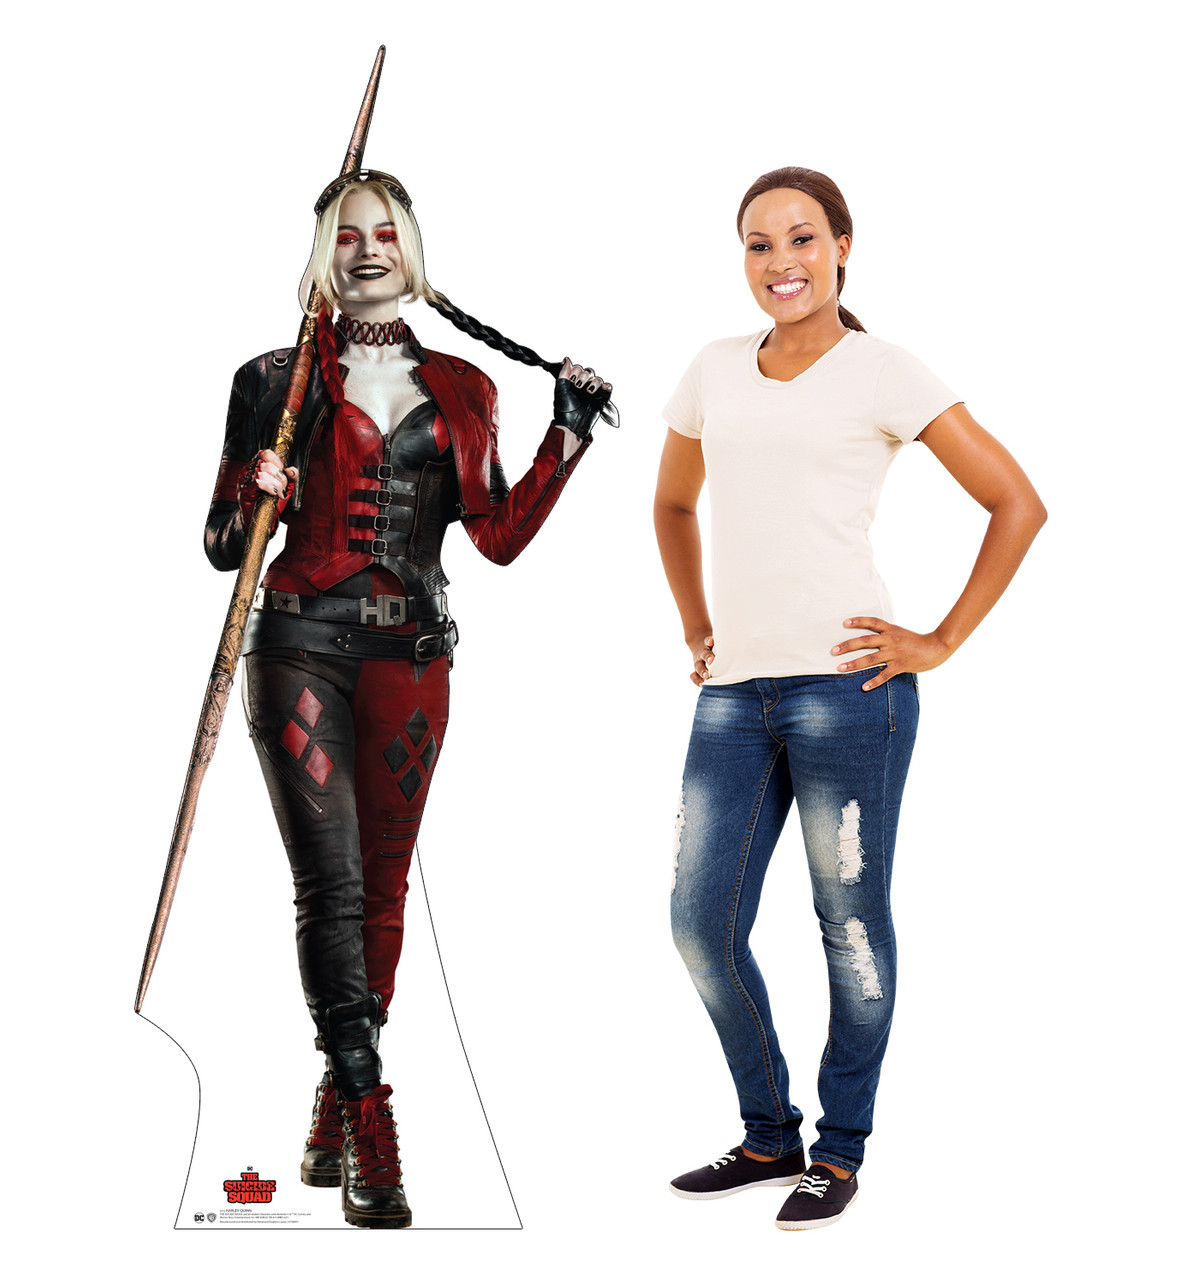 Life-size cardboard standee of Harley Quinn from Suicide Squad 2 with model.